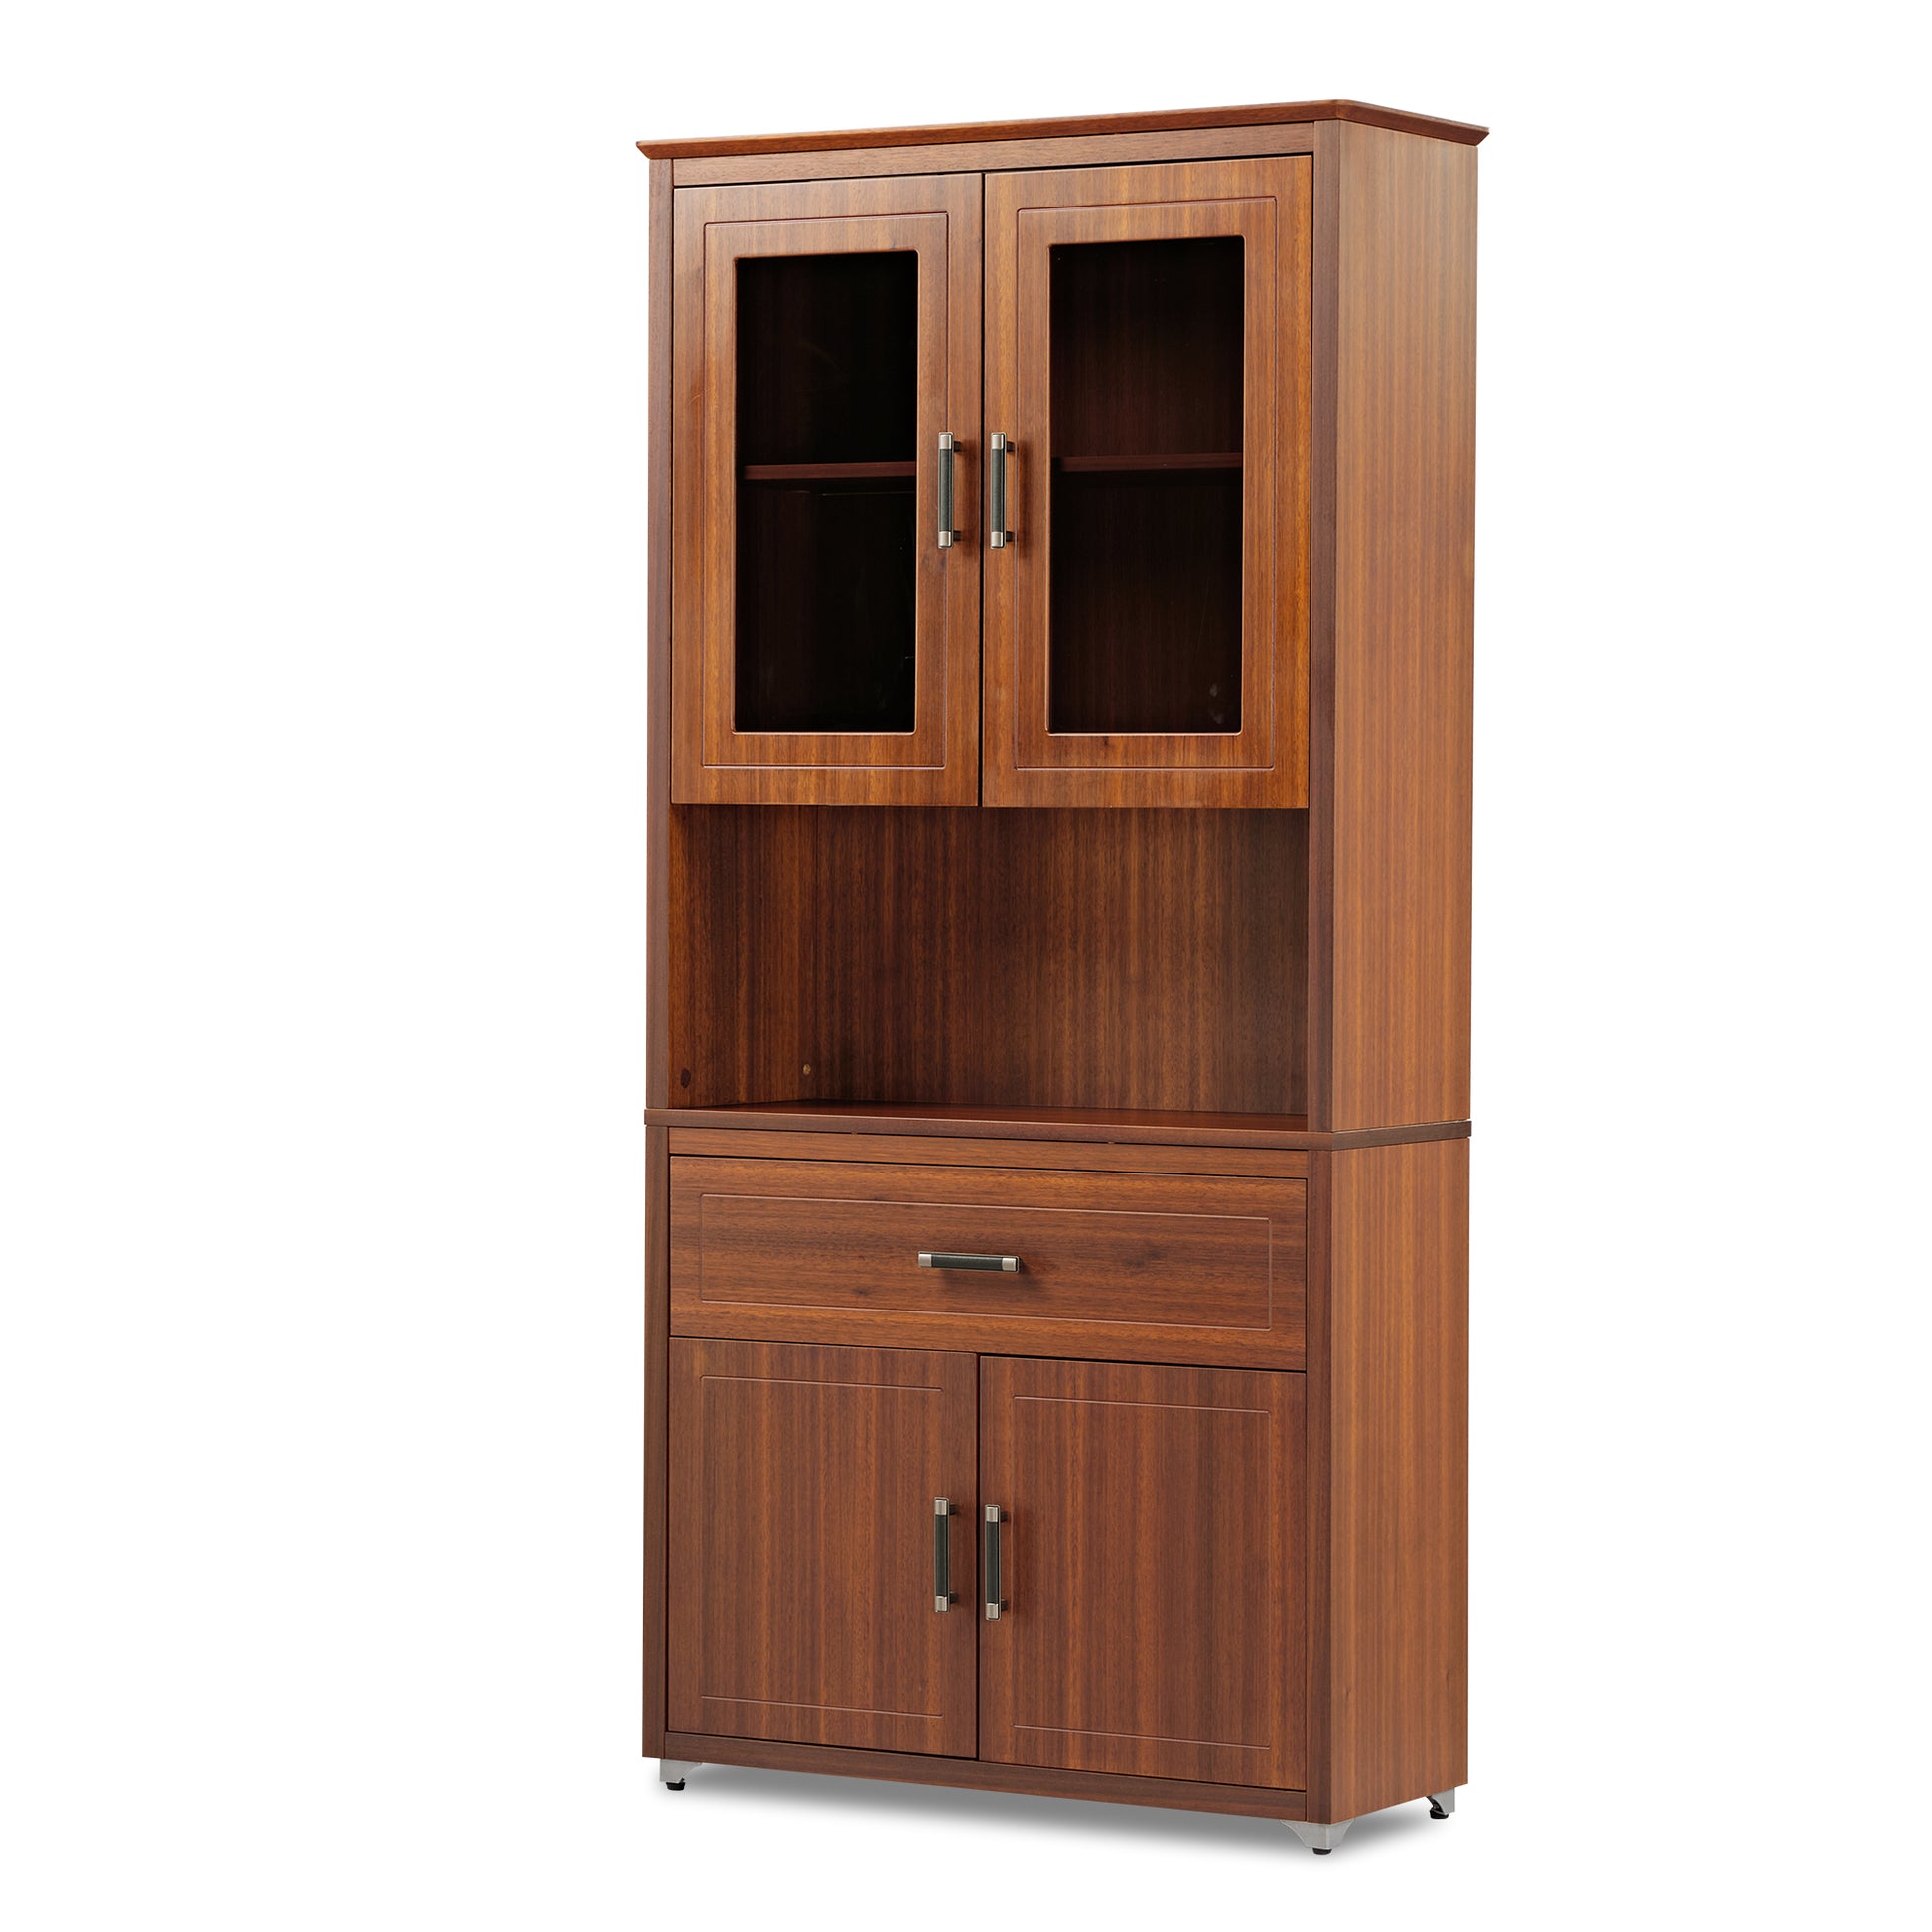 Executive Ark Collection, 72 inch Storage Cabinet Bookshelf with Doors, Walnut Closed Display Image